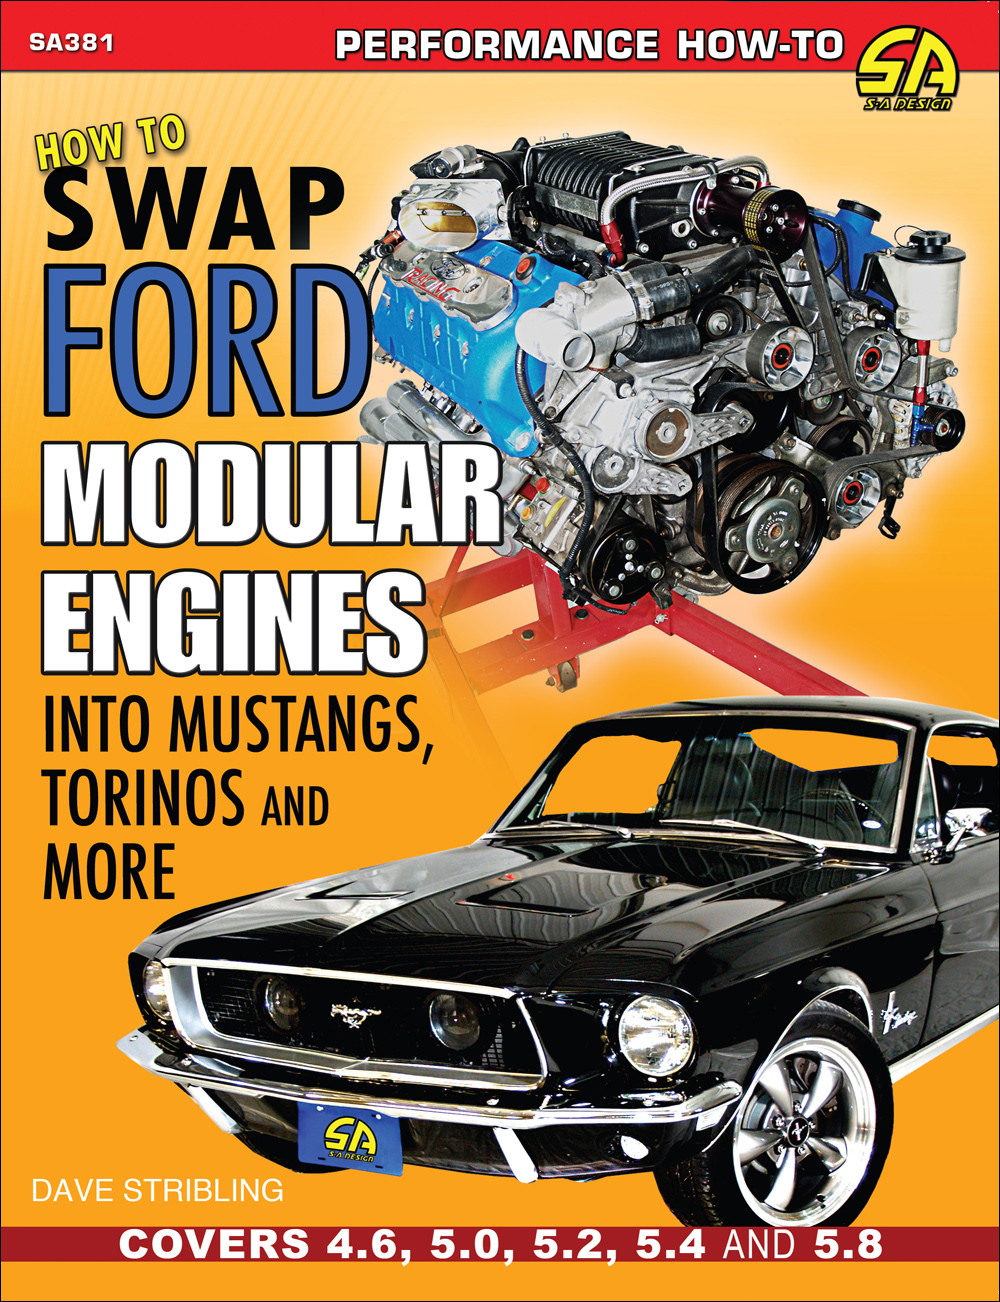 How To Swap Ford Modular Engines Into Mustangs, Torinos, Etc.